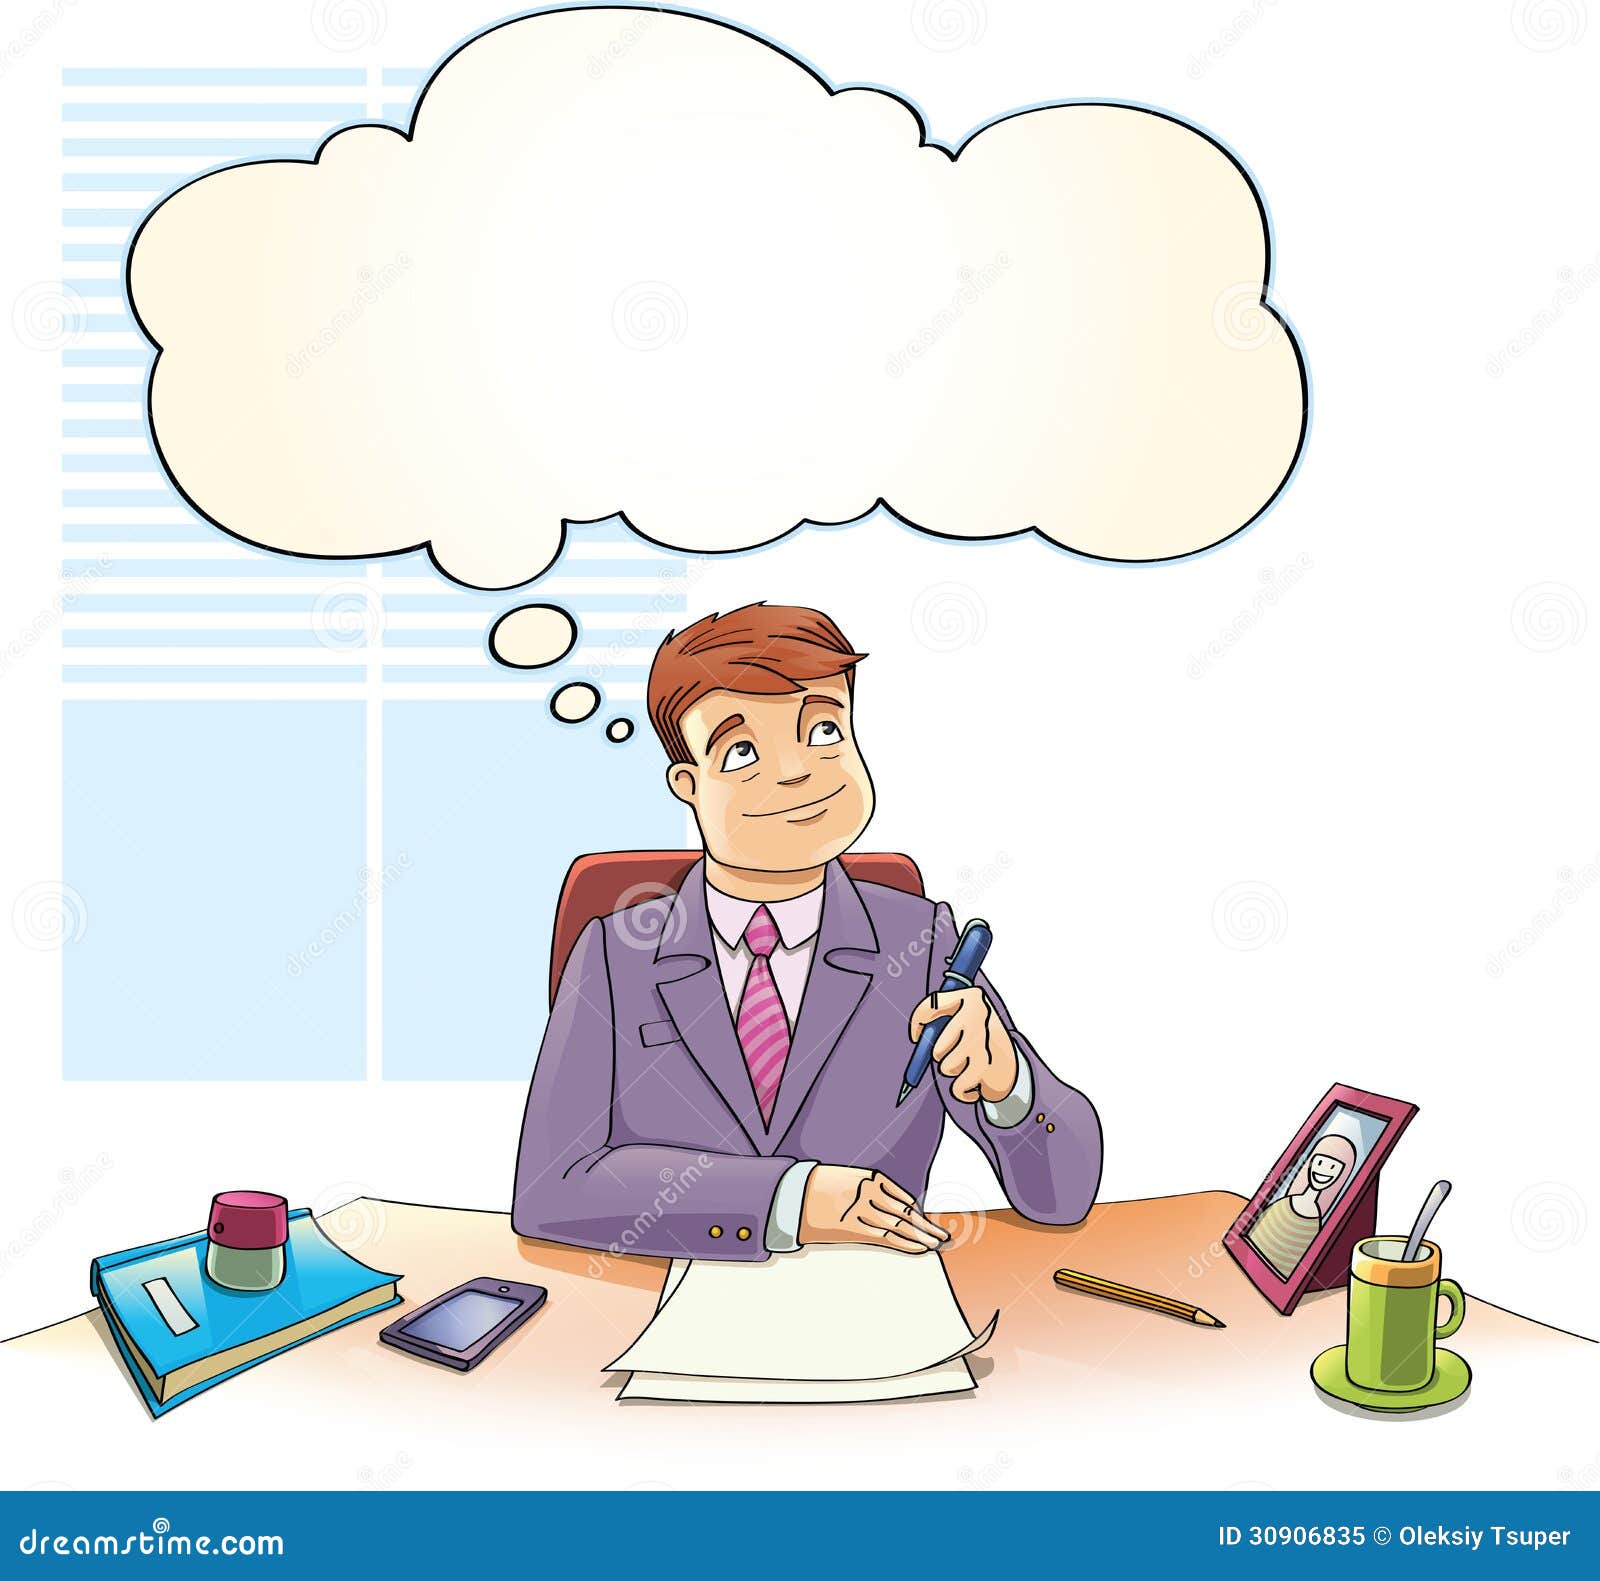 clipart of businessman thinking - photo #2